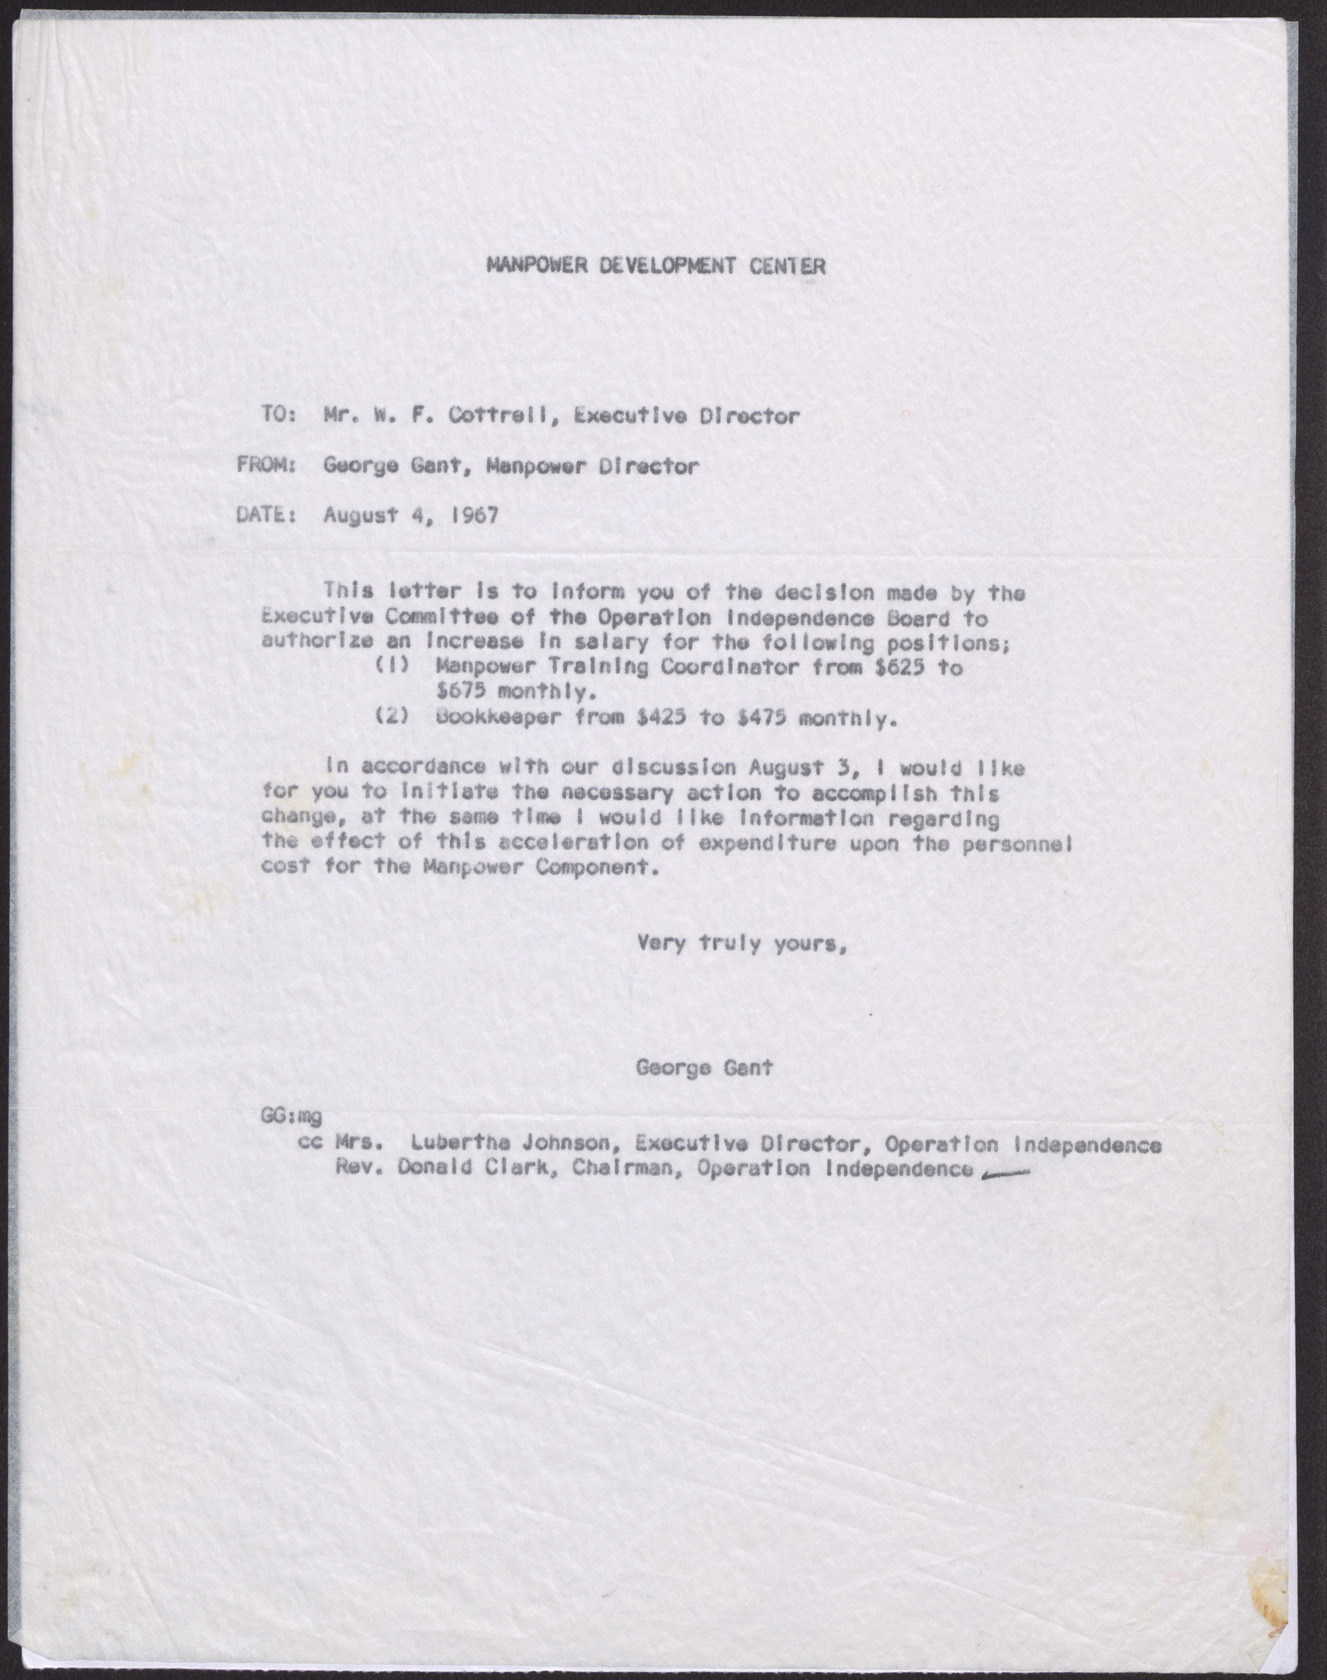 Letter to Mr. W. F. Cottrell from George Gant, August 4, 1967